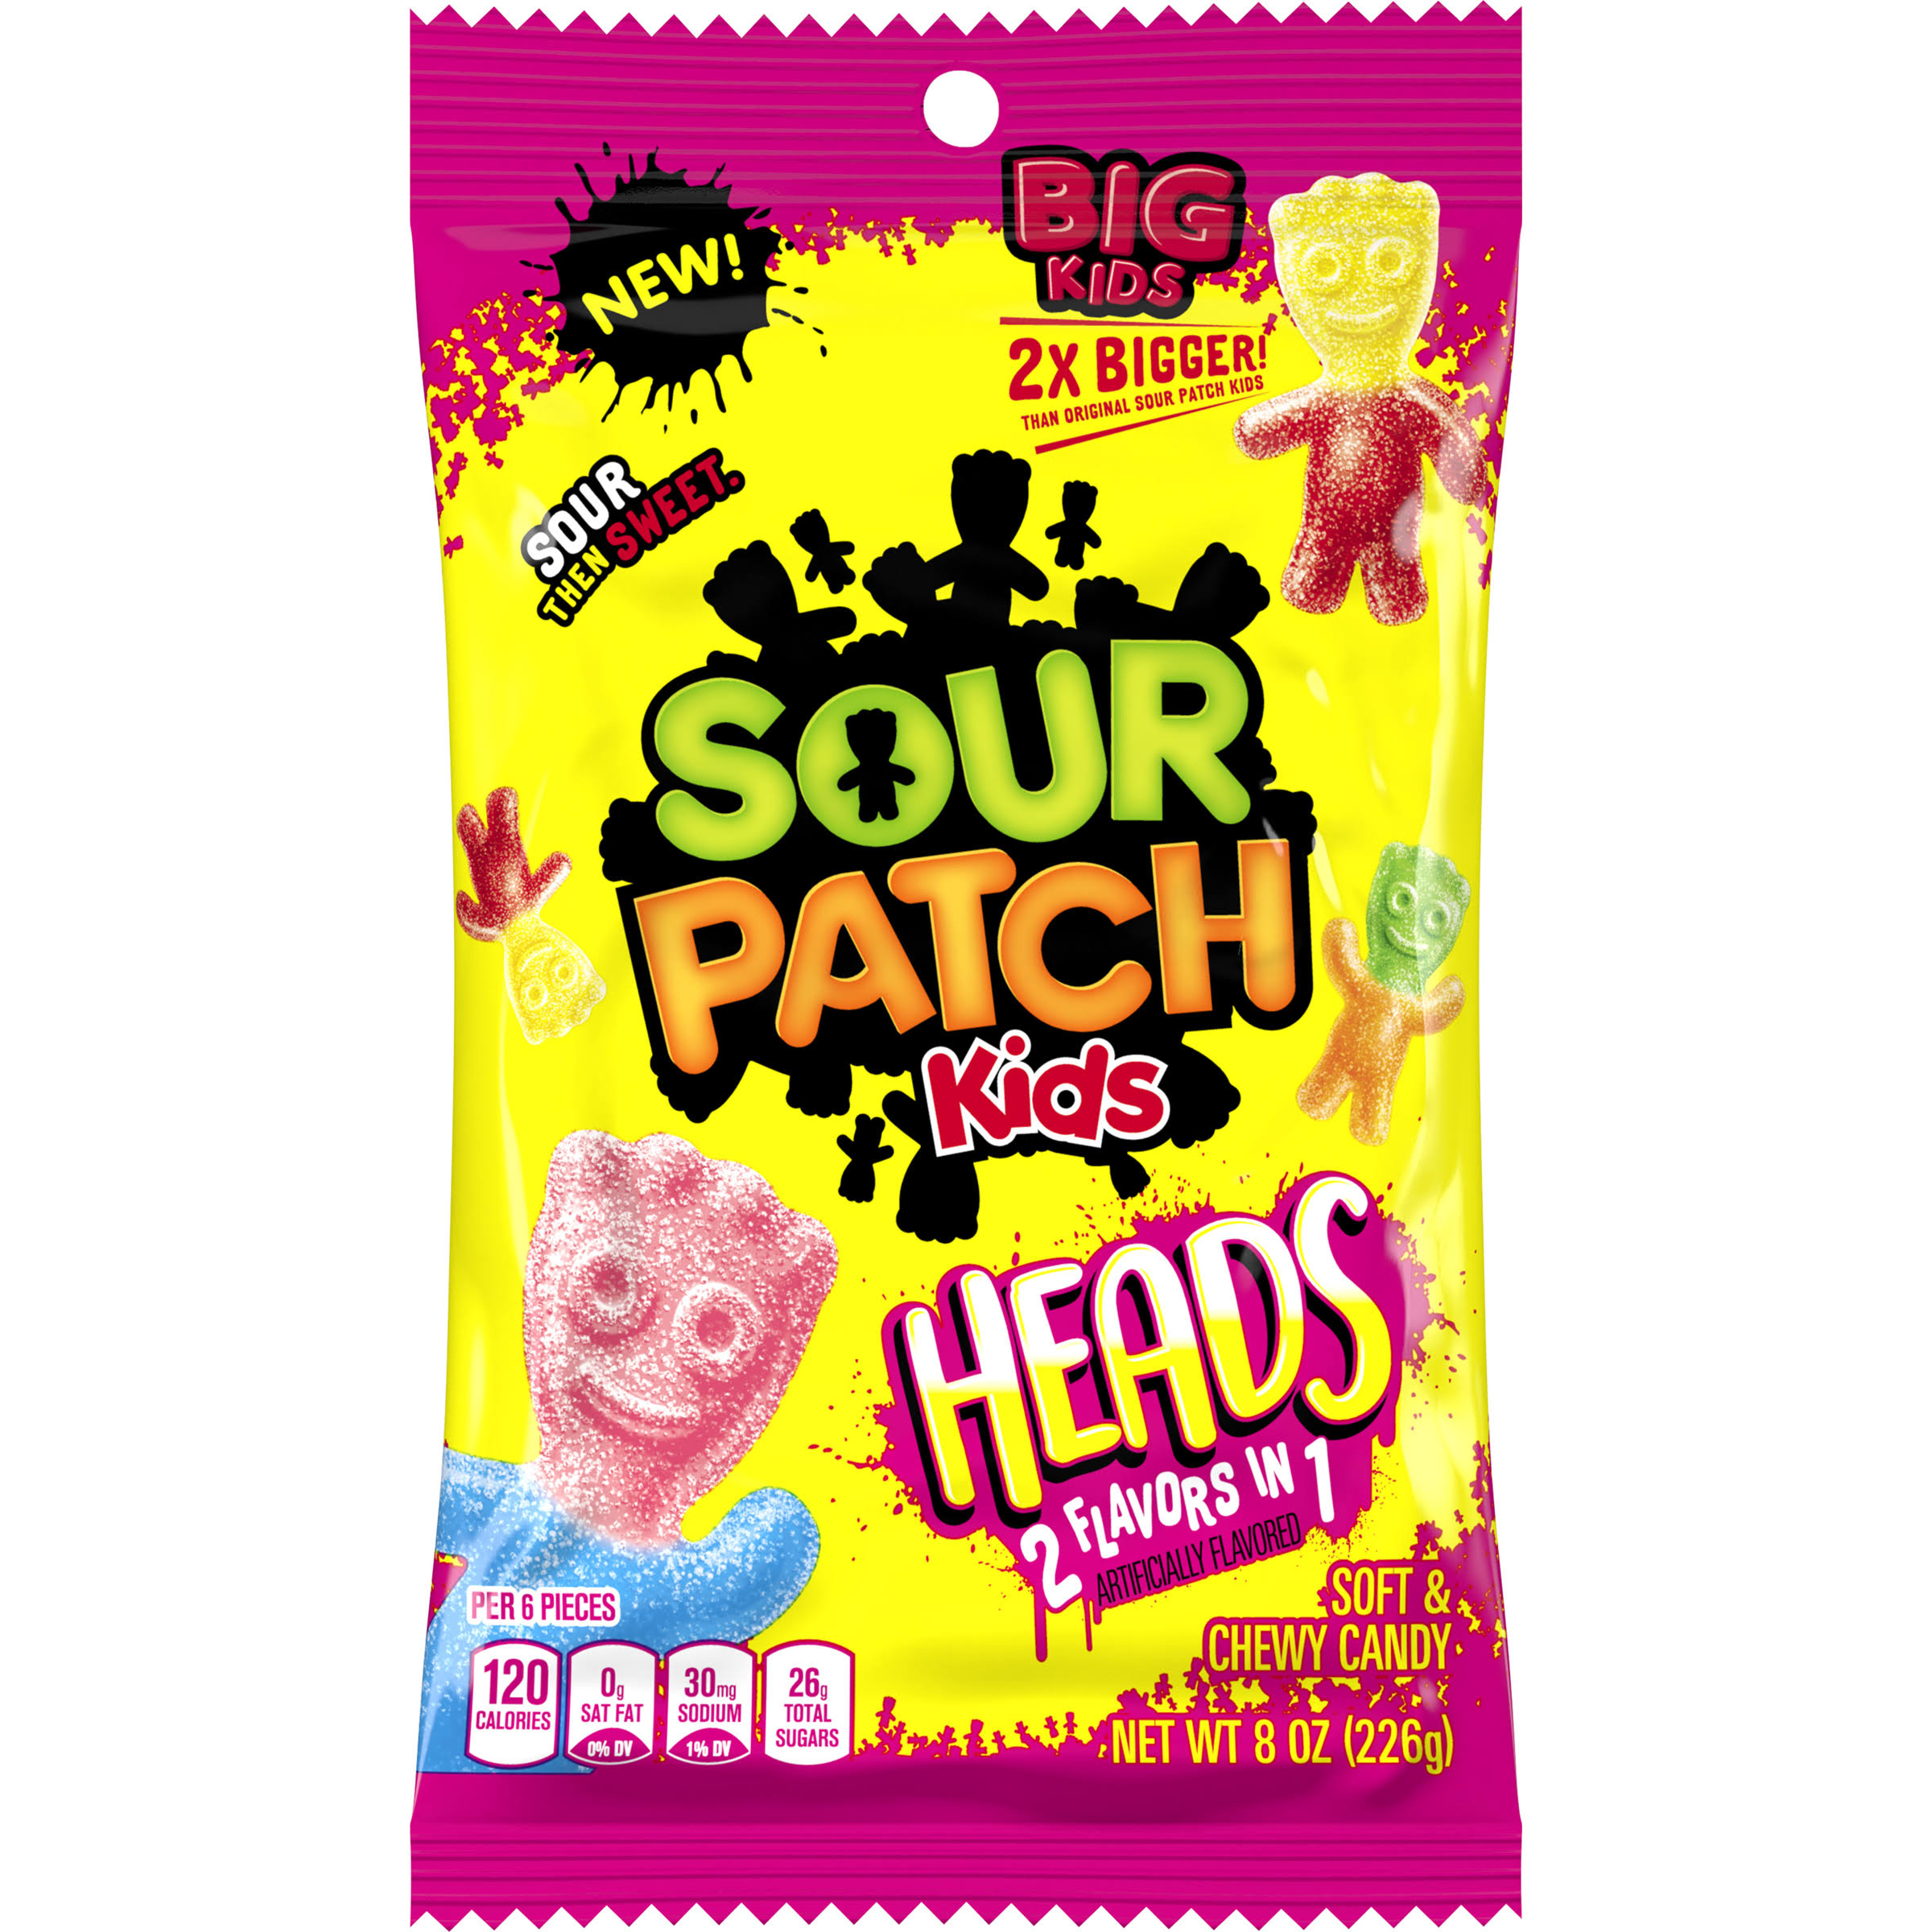 Sour Patch Kids Candy, Soft & Chewy, Heads 2 Flavors in 1 - 8 oz